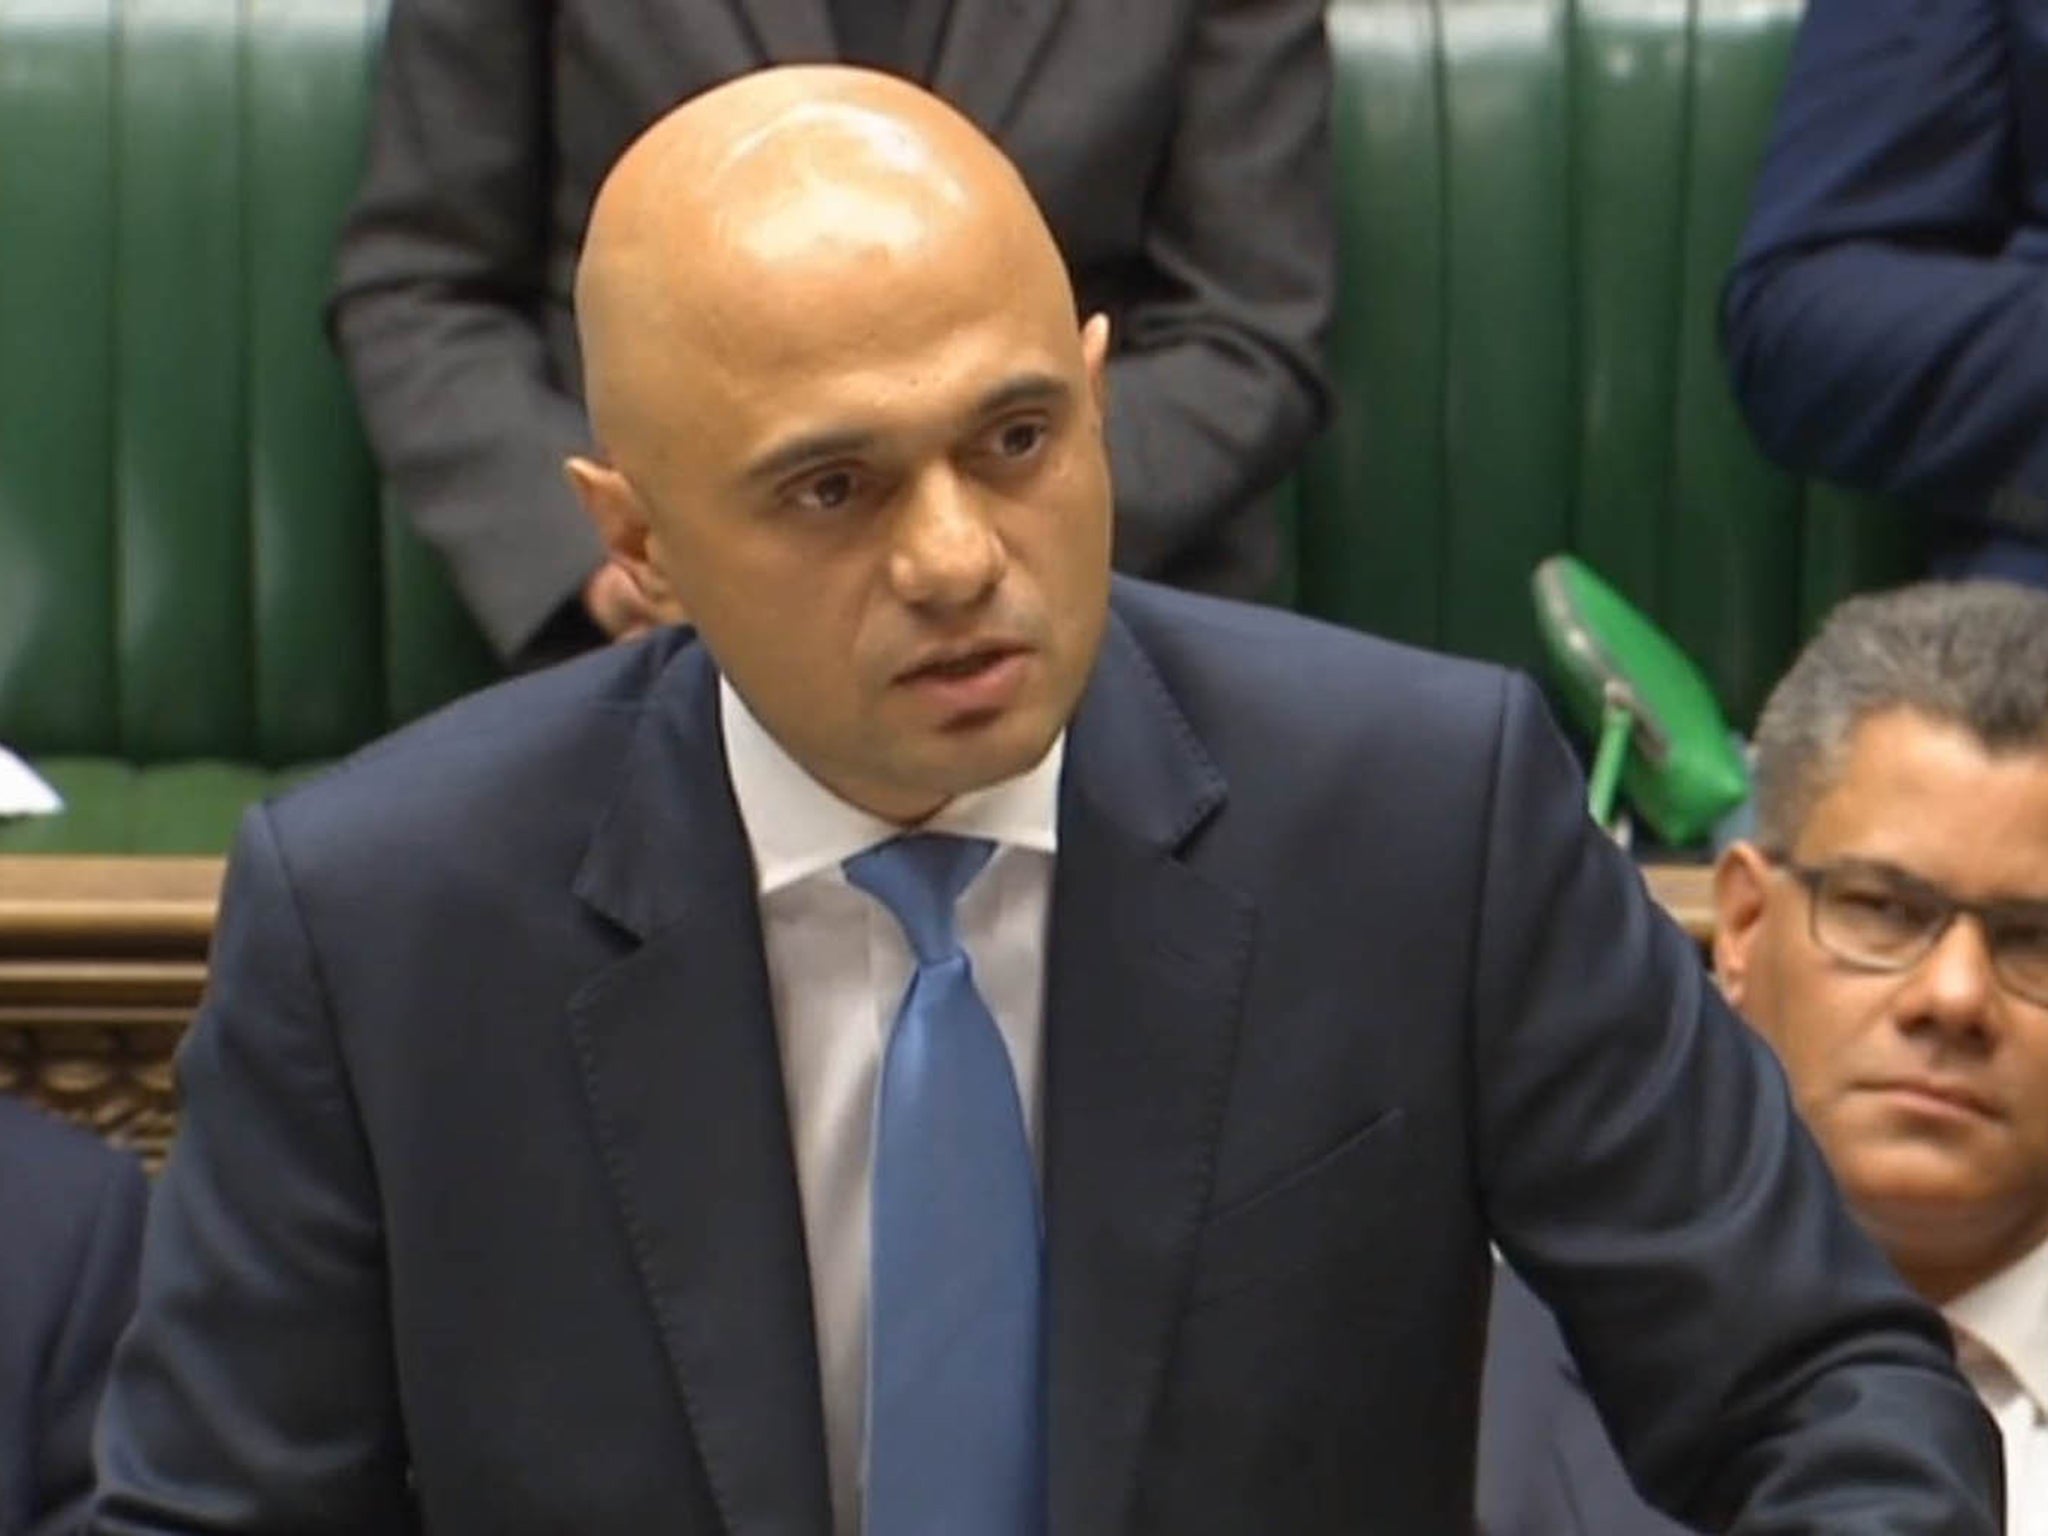 Sajid Javid said many survivors have turned down offers of temporary accommodation - but denied this was because it was unsuitable